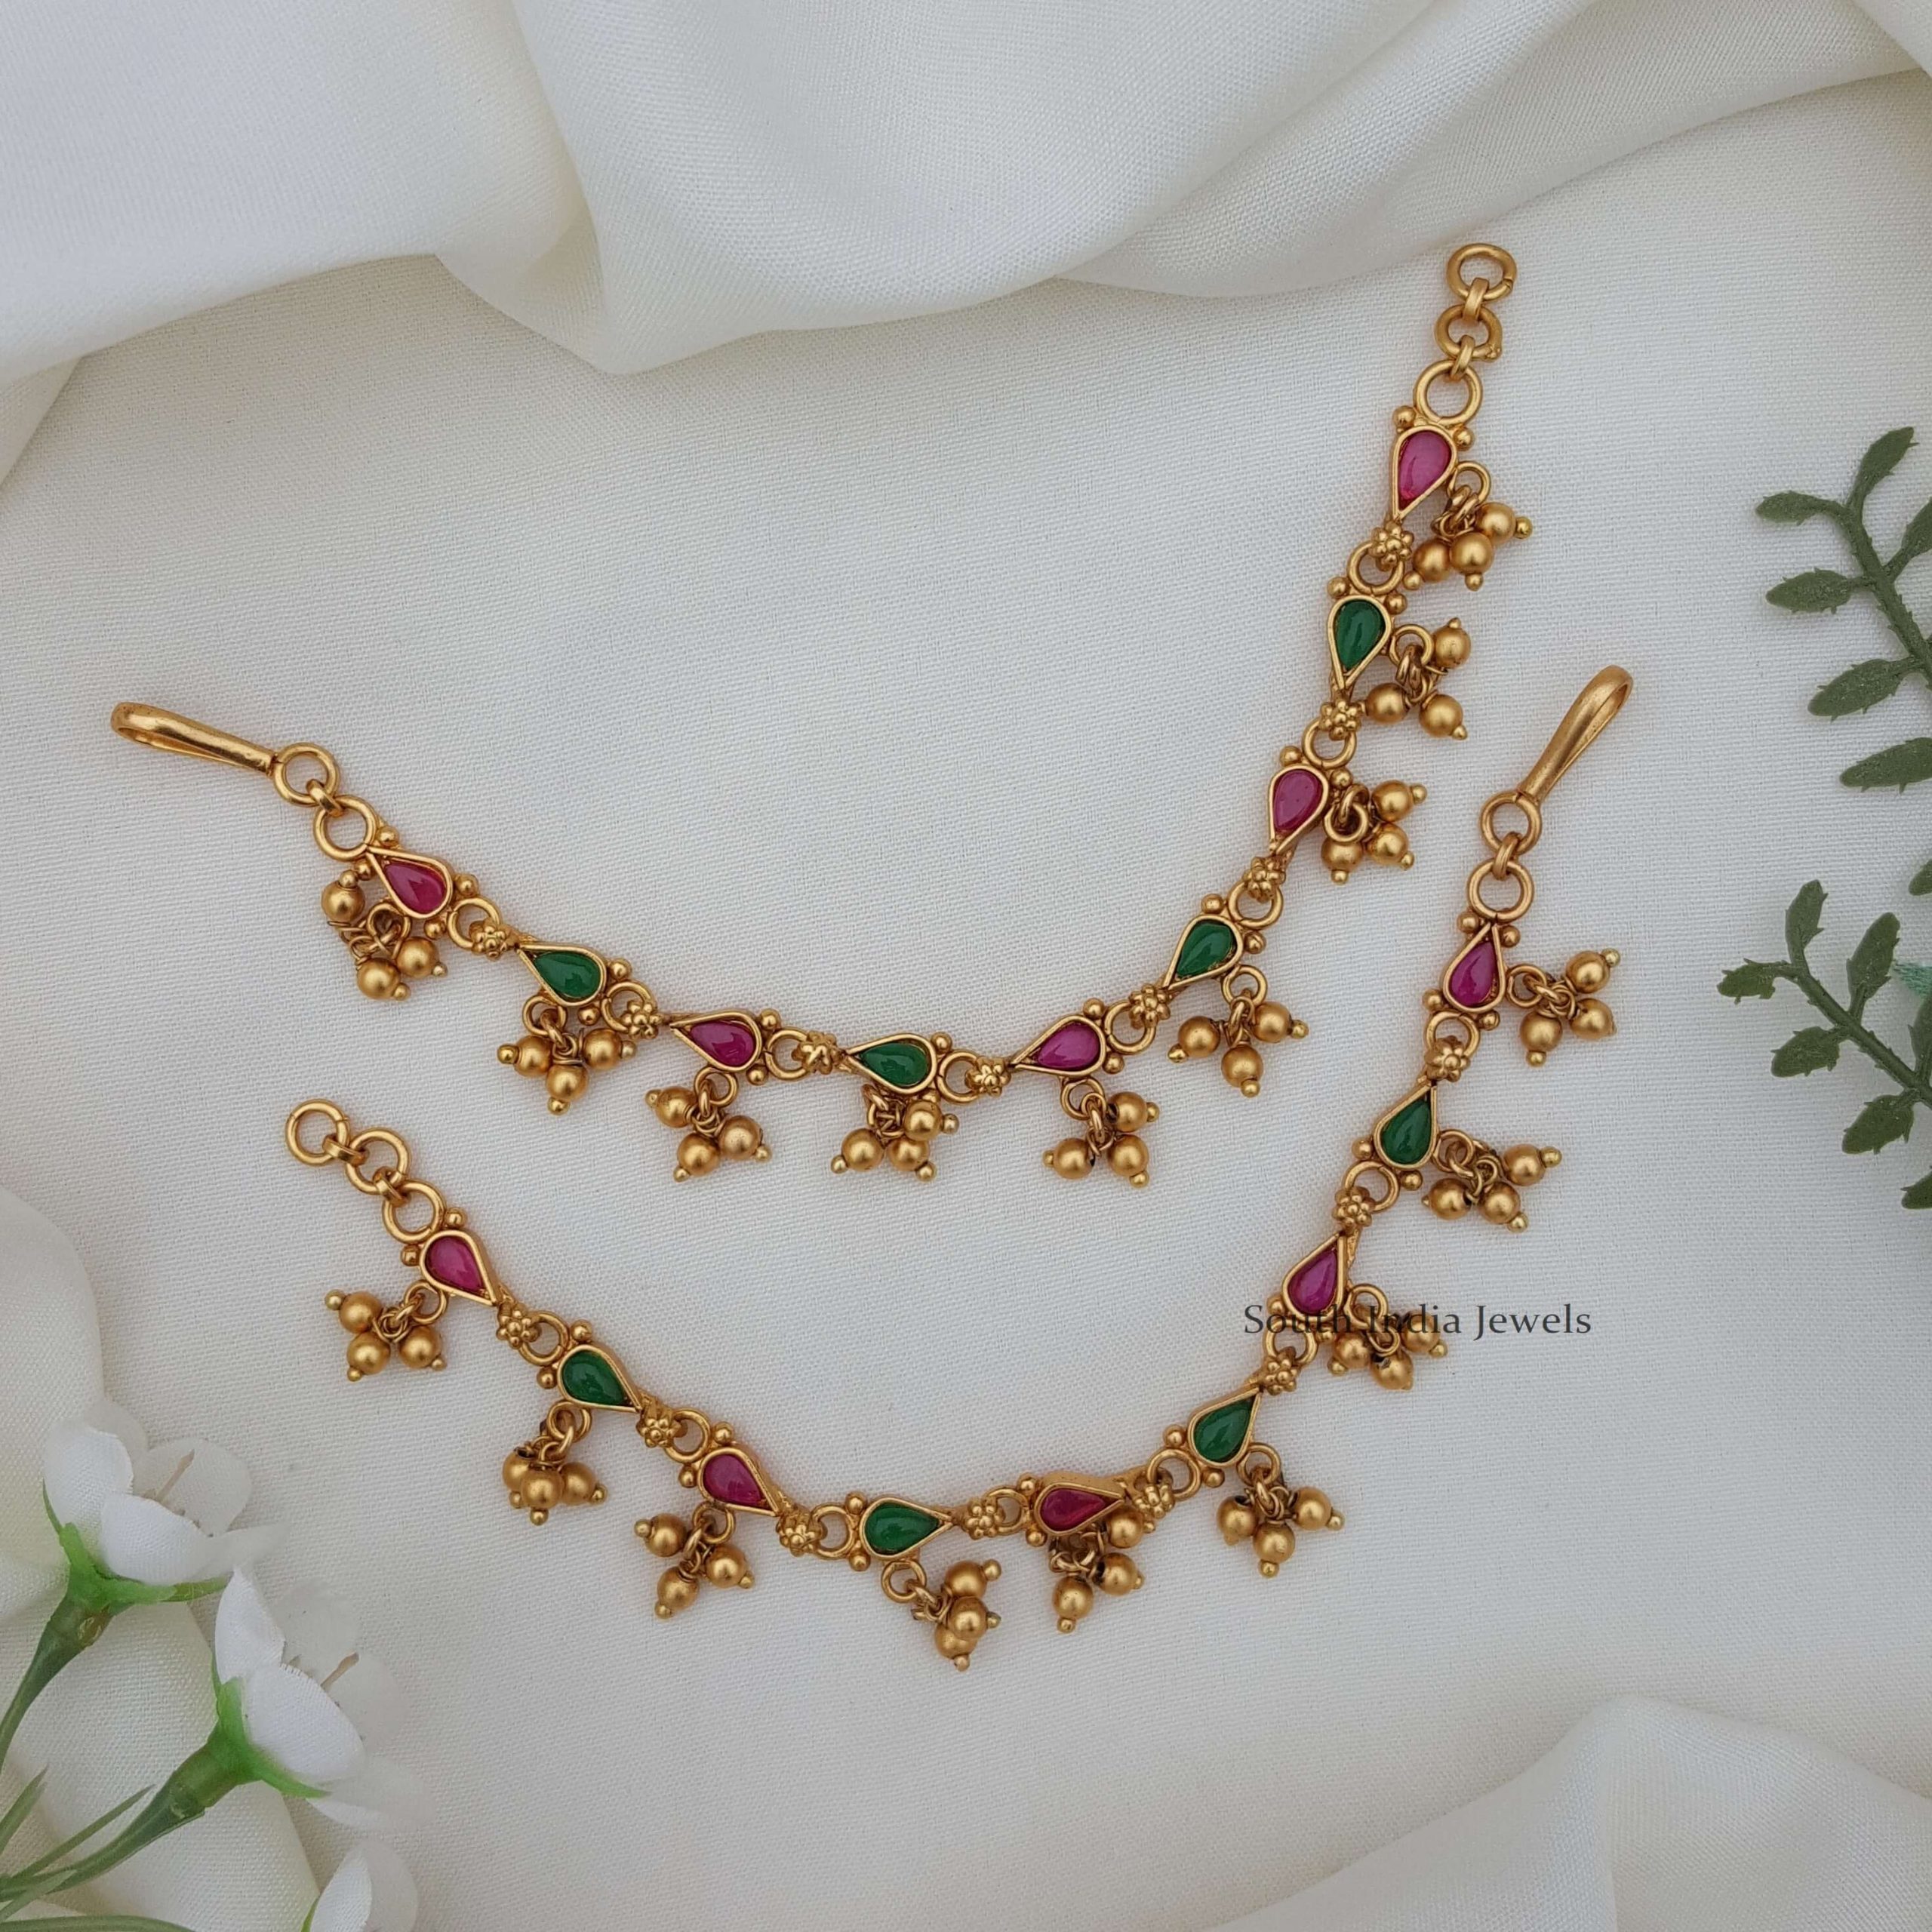 Marvelous Non Idol Ear Chain - South India Jewels